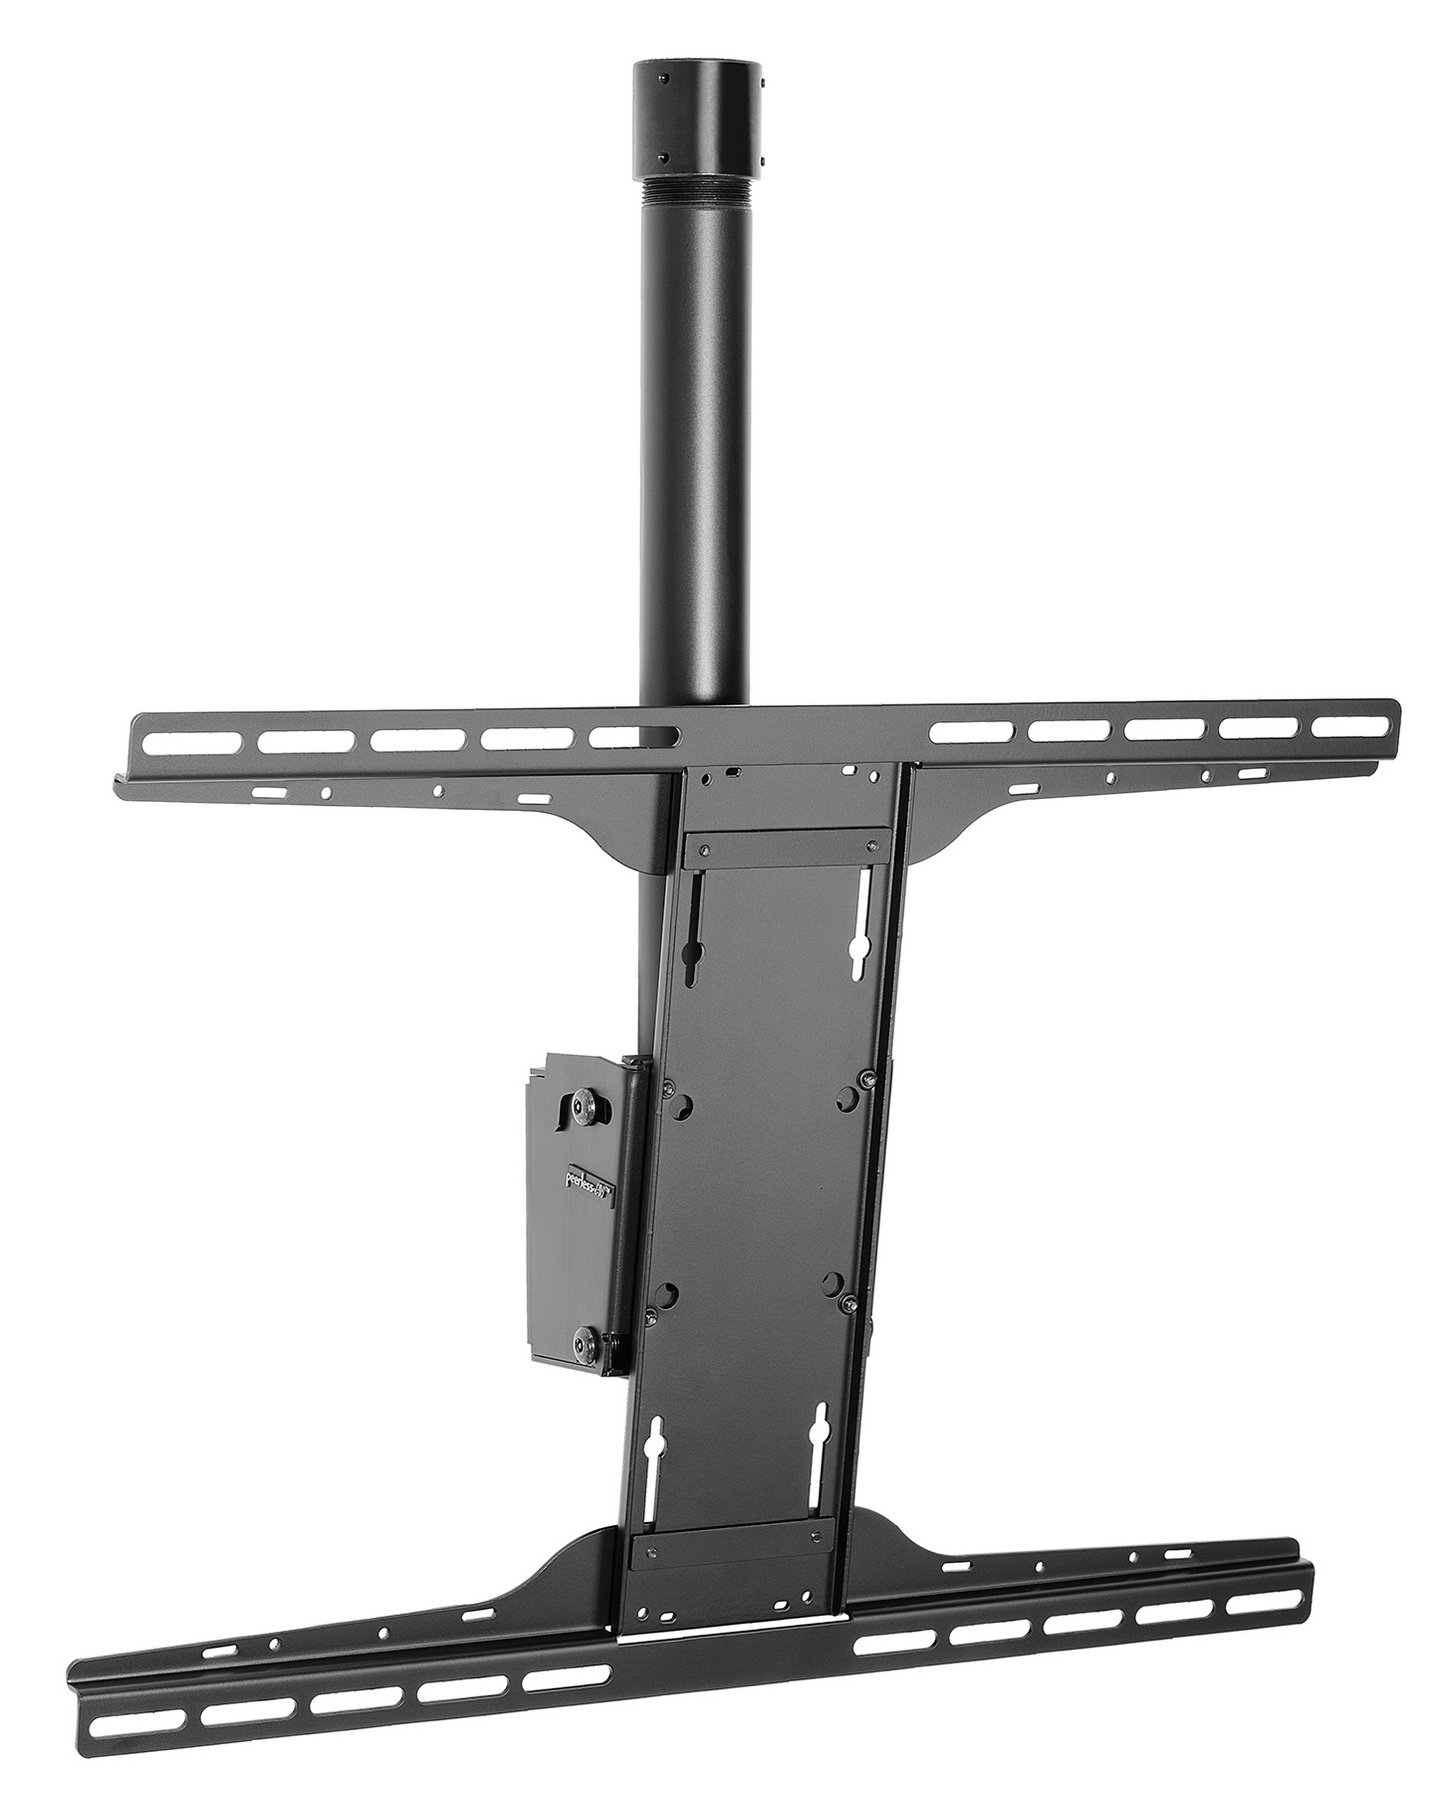 Peerless-AV PLCK-UNL SmartMount Ceiling Mount with 1.5" NPS Coupler and Universal I-Shaped Adaptor for 32” to 90” Displays